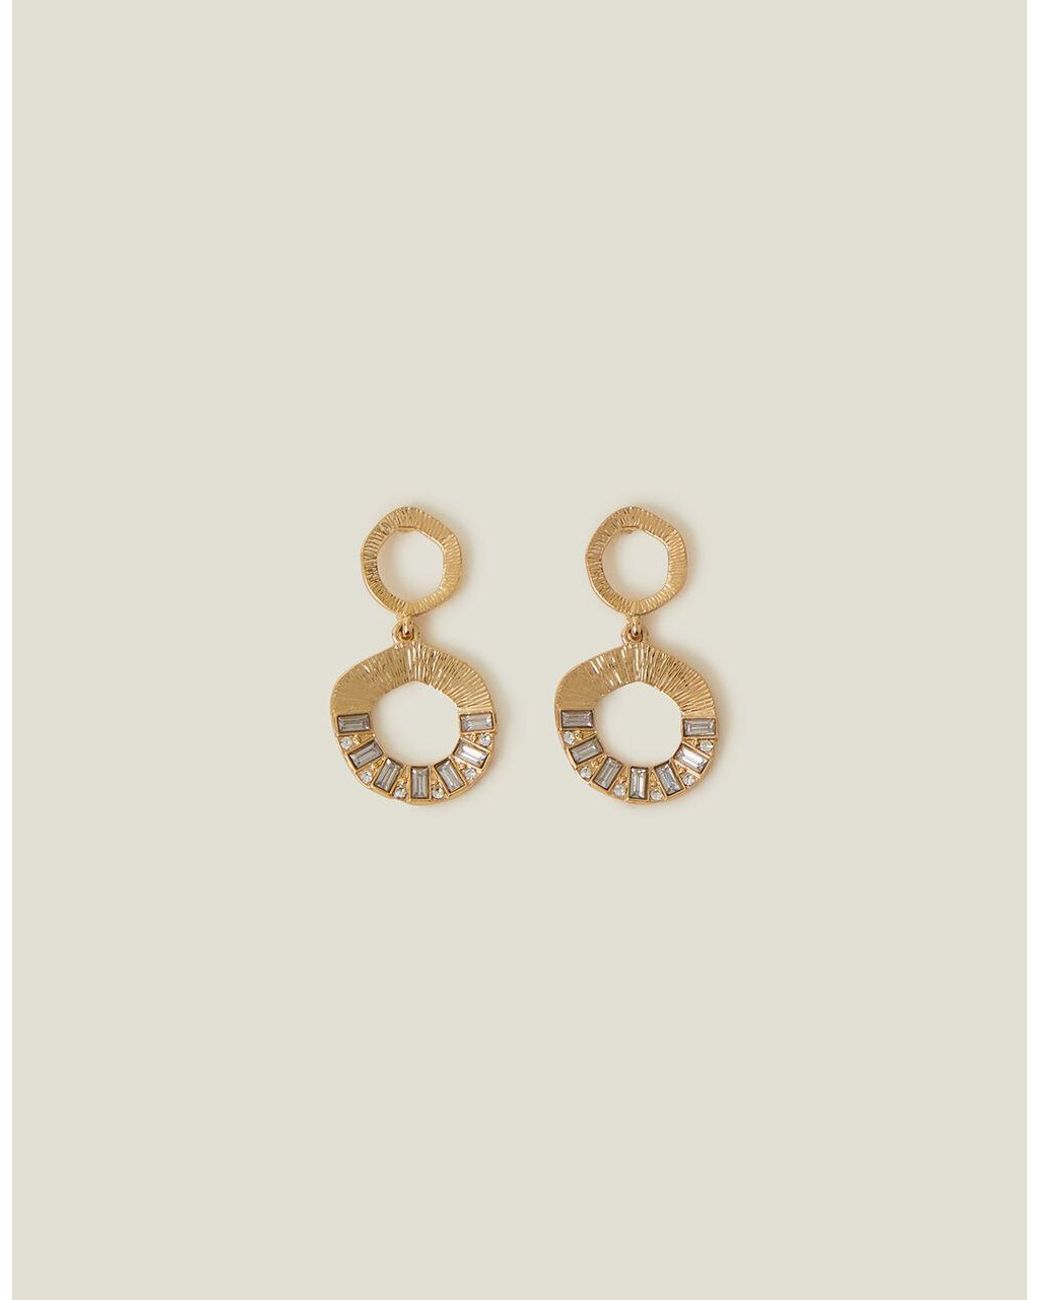 Accessorize Women's Textured Circle Drop Earrings in Natural | Lyst UK